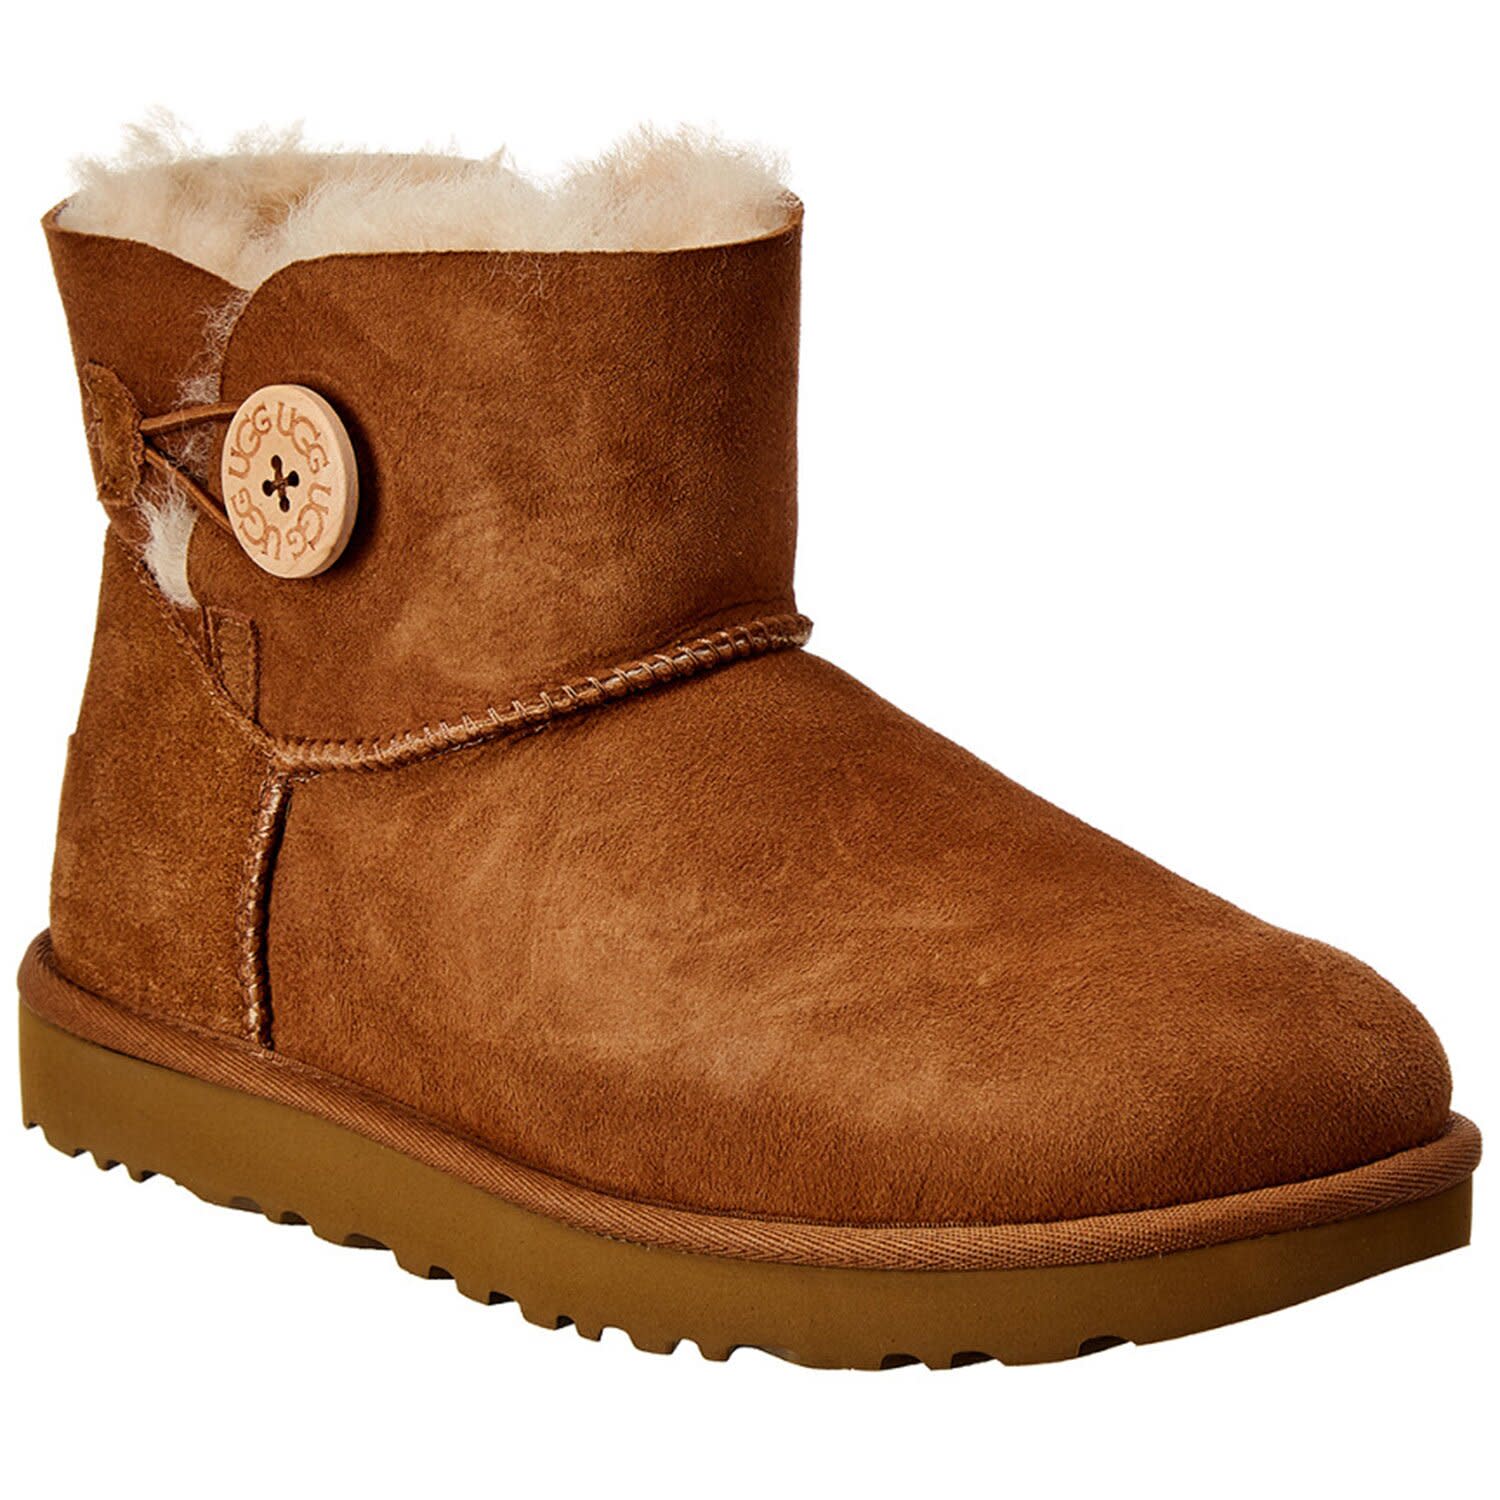 cyber monday deals on ugg boots